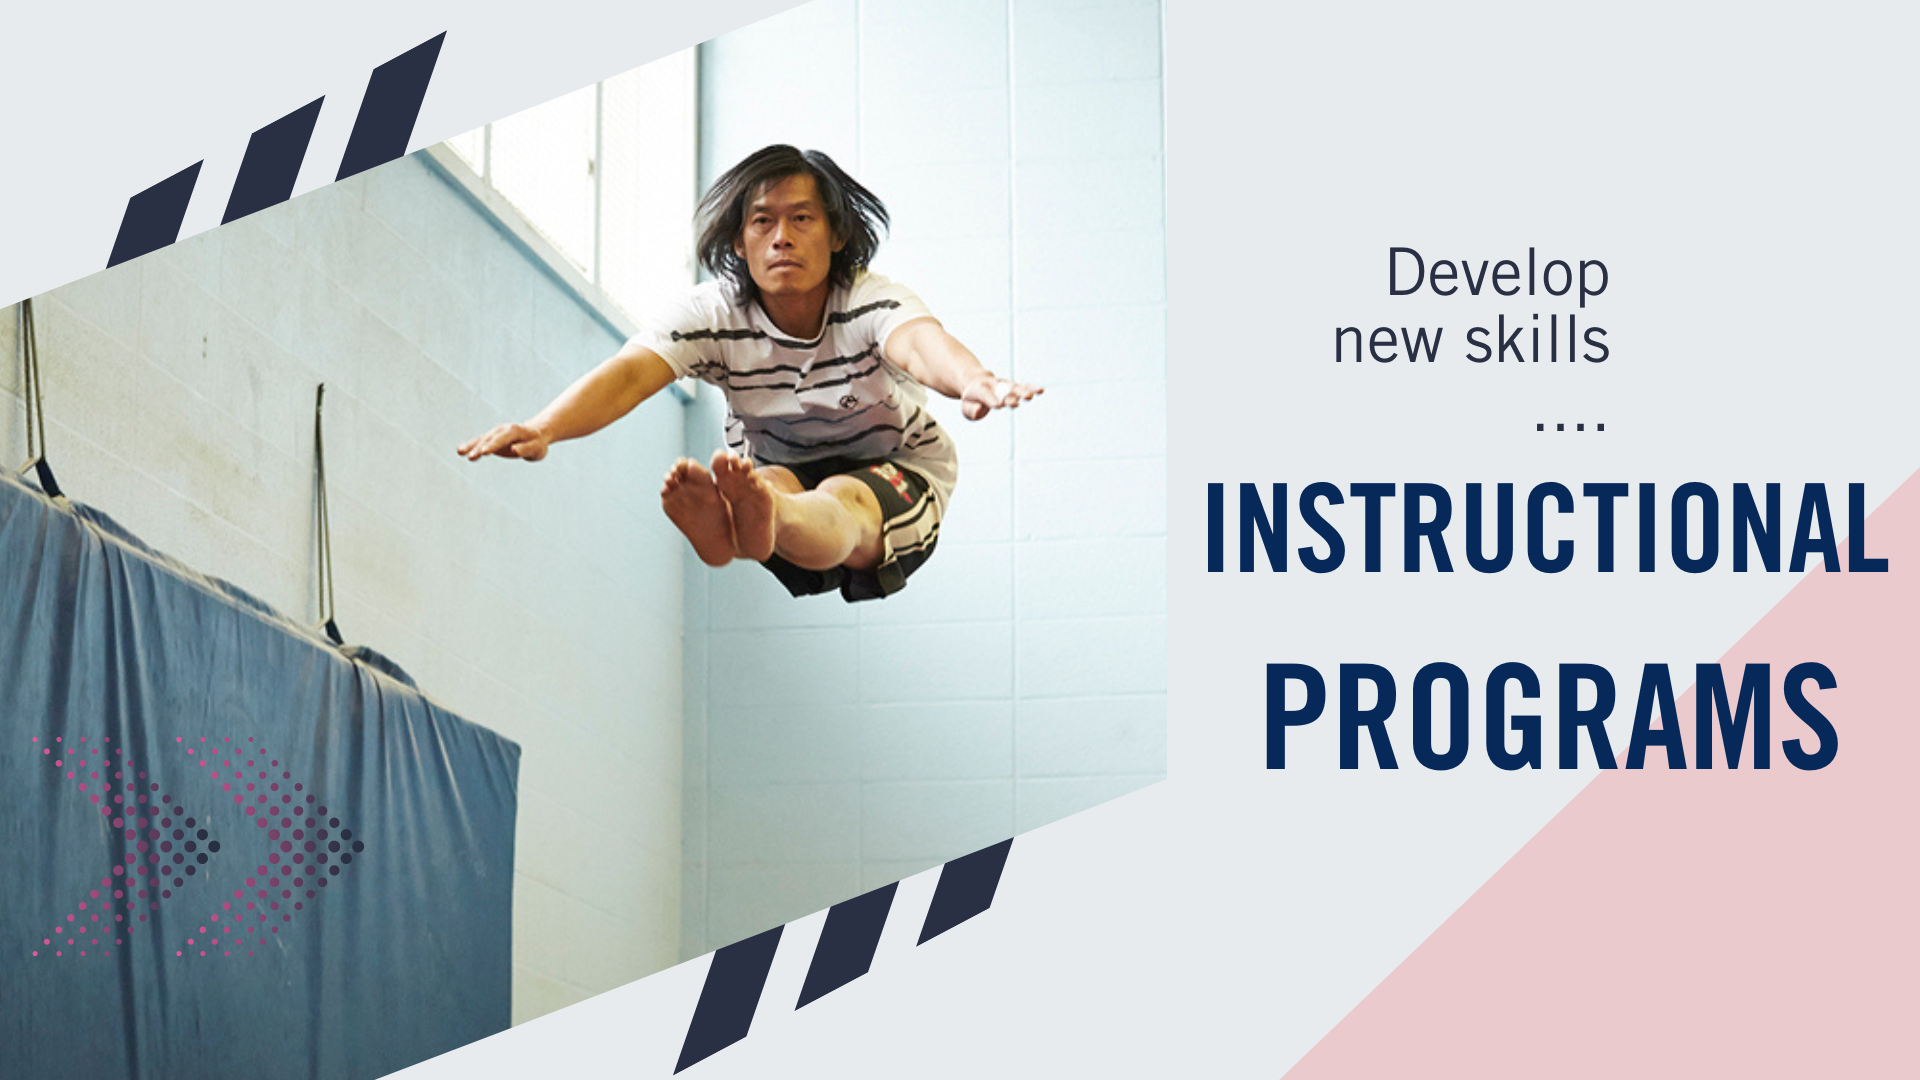 Image showcasing registered instructional program depicts a male student in the air in a pike position.